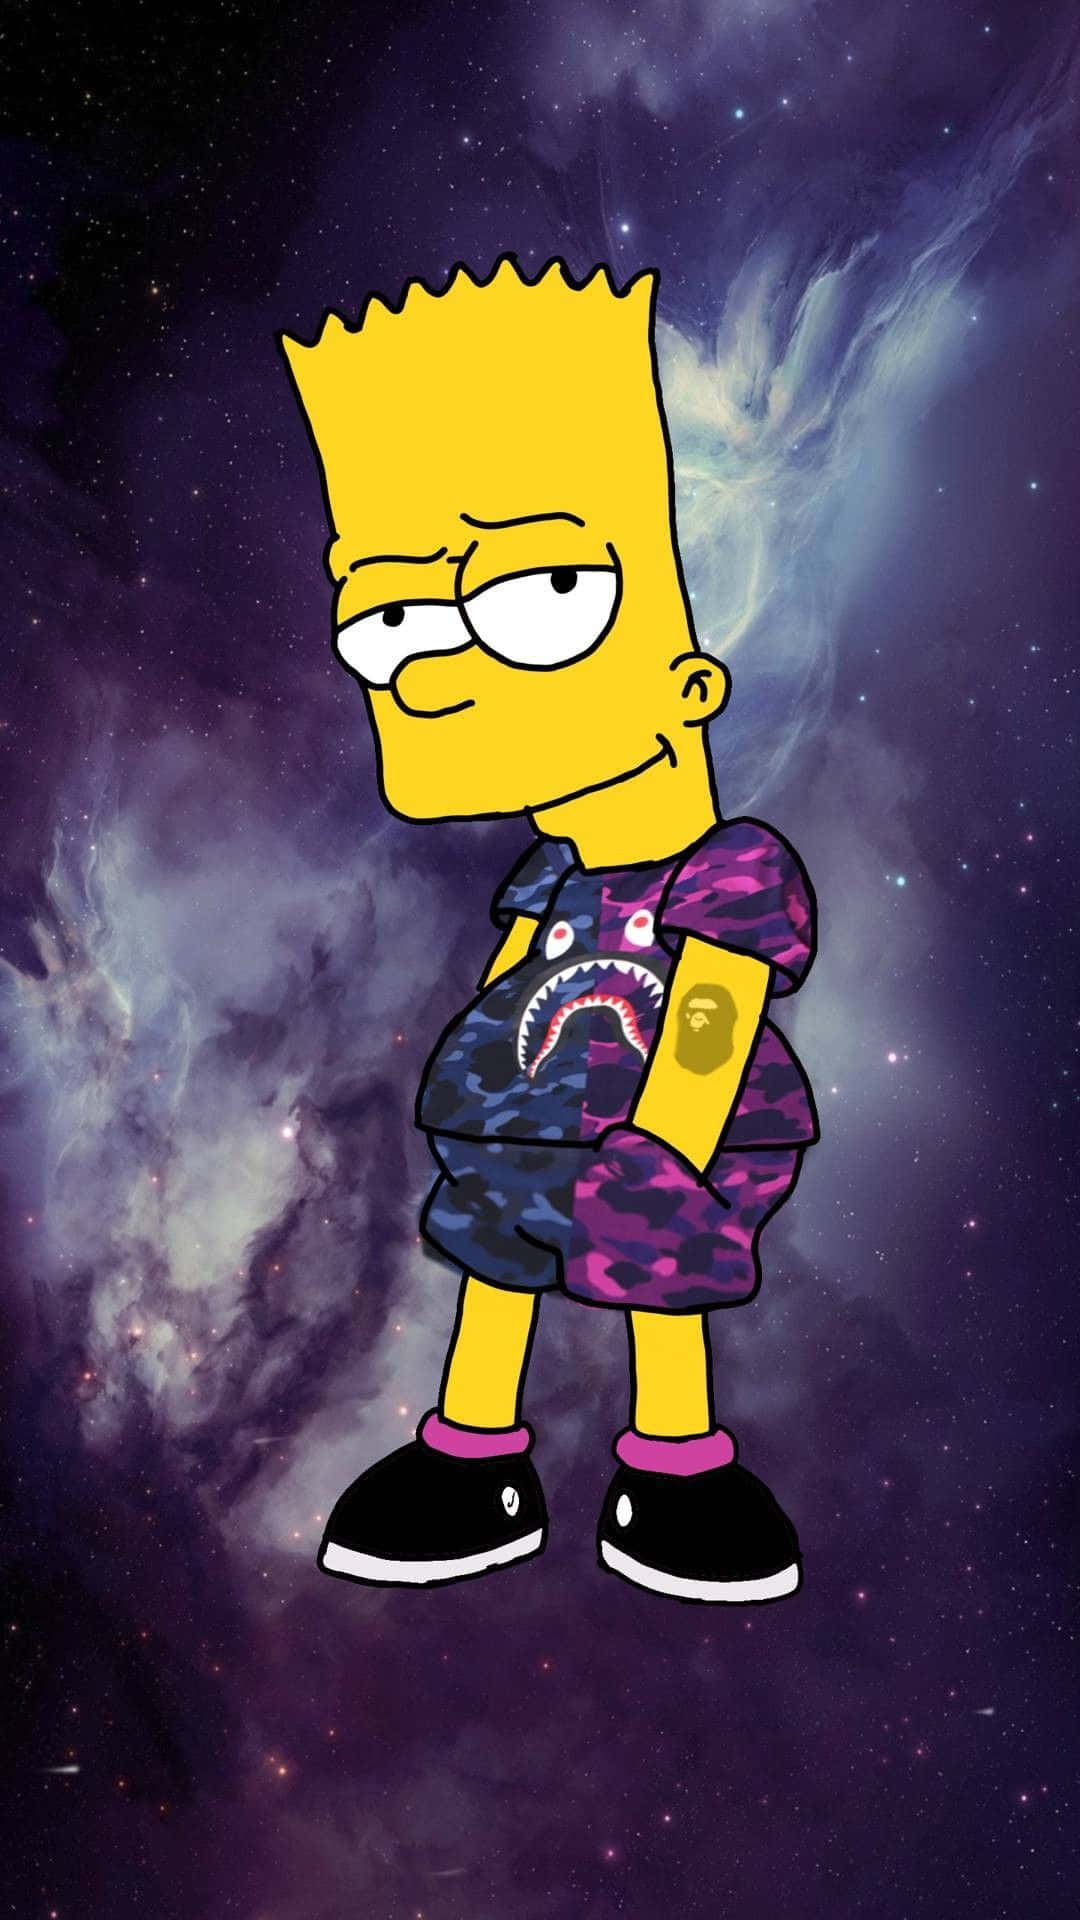 A psychedelic experience with Bart Simpson Wallpaper